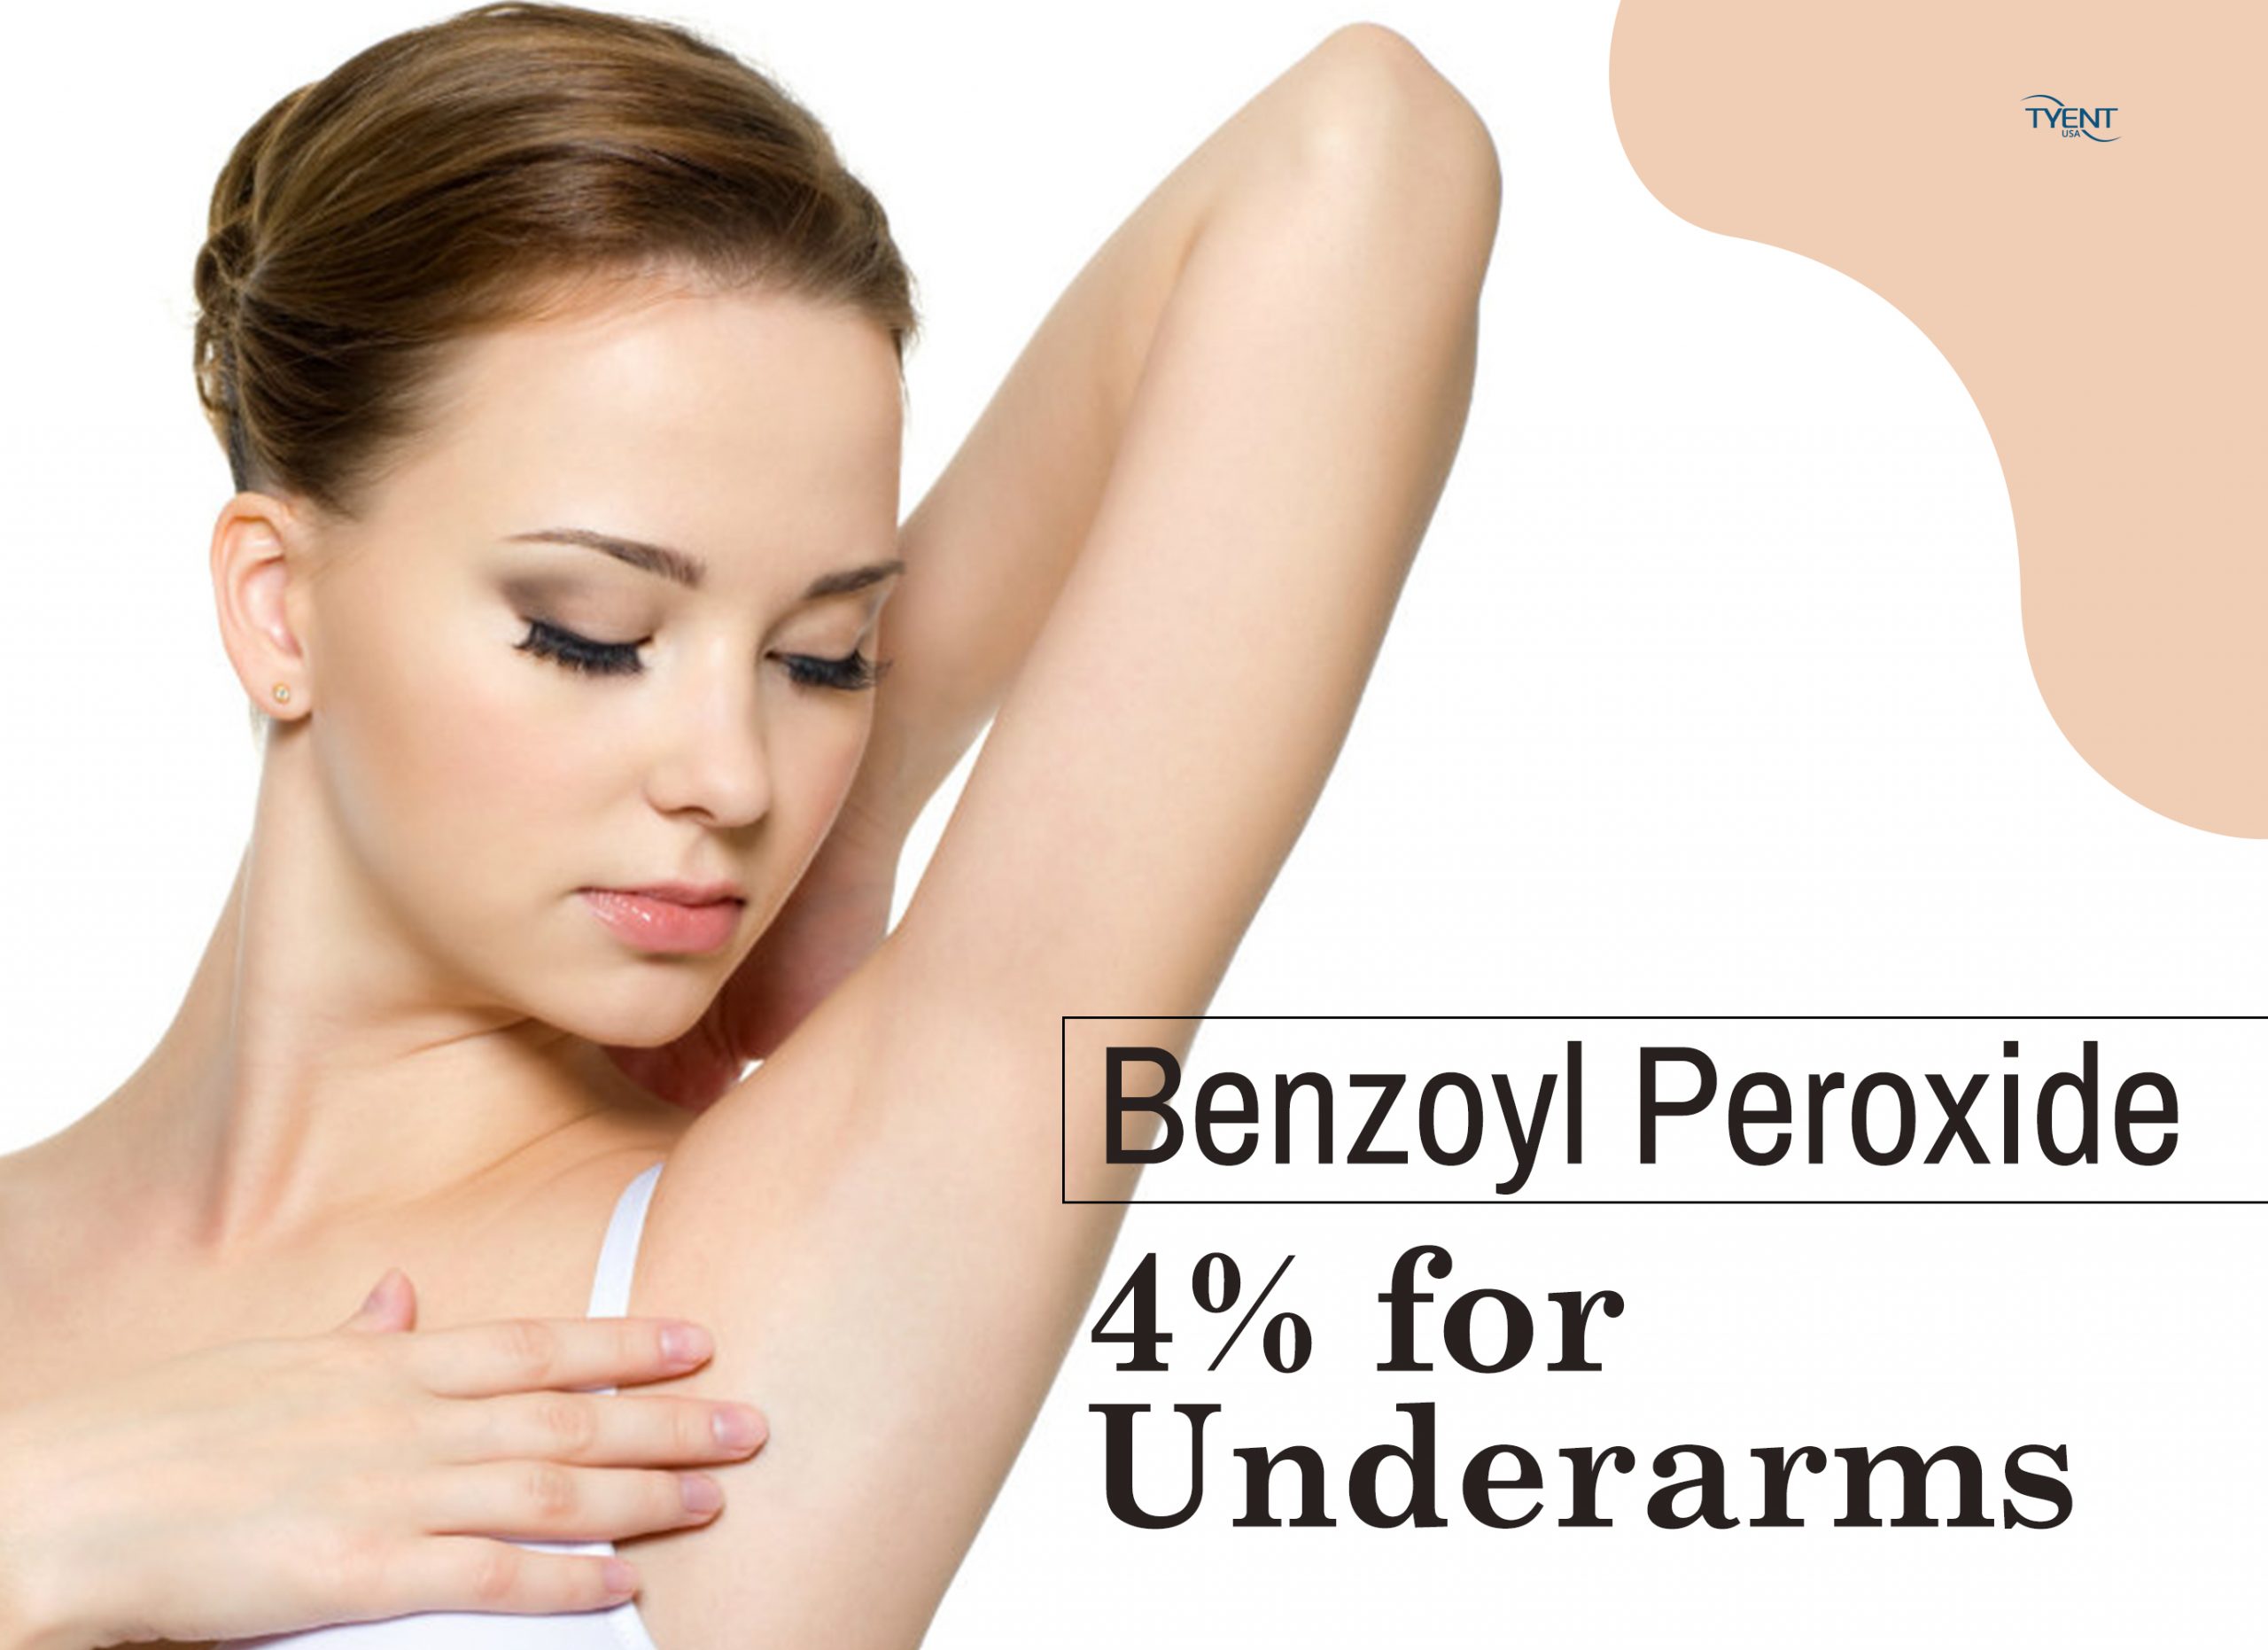 Benzoyl Peroxide 4% for Underarms